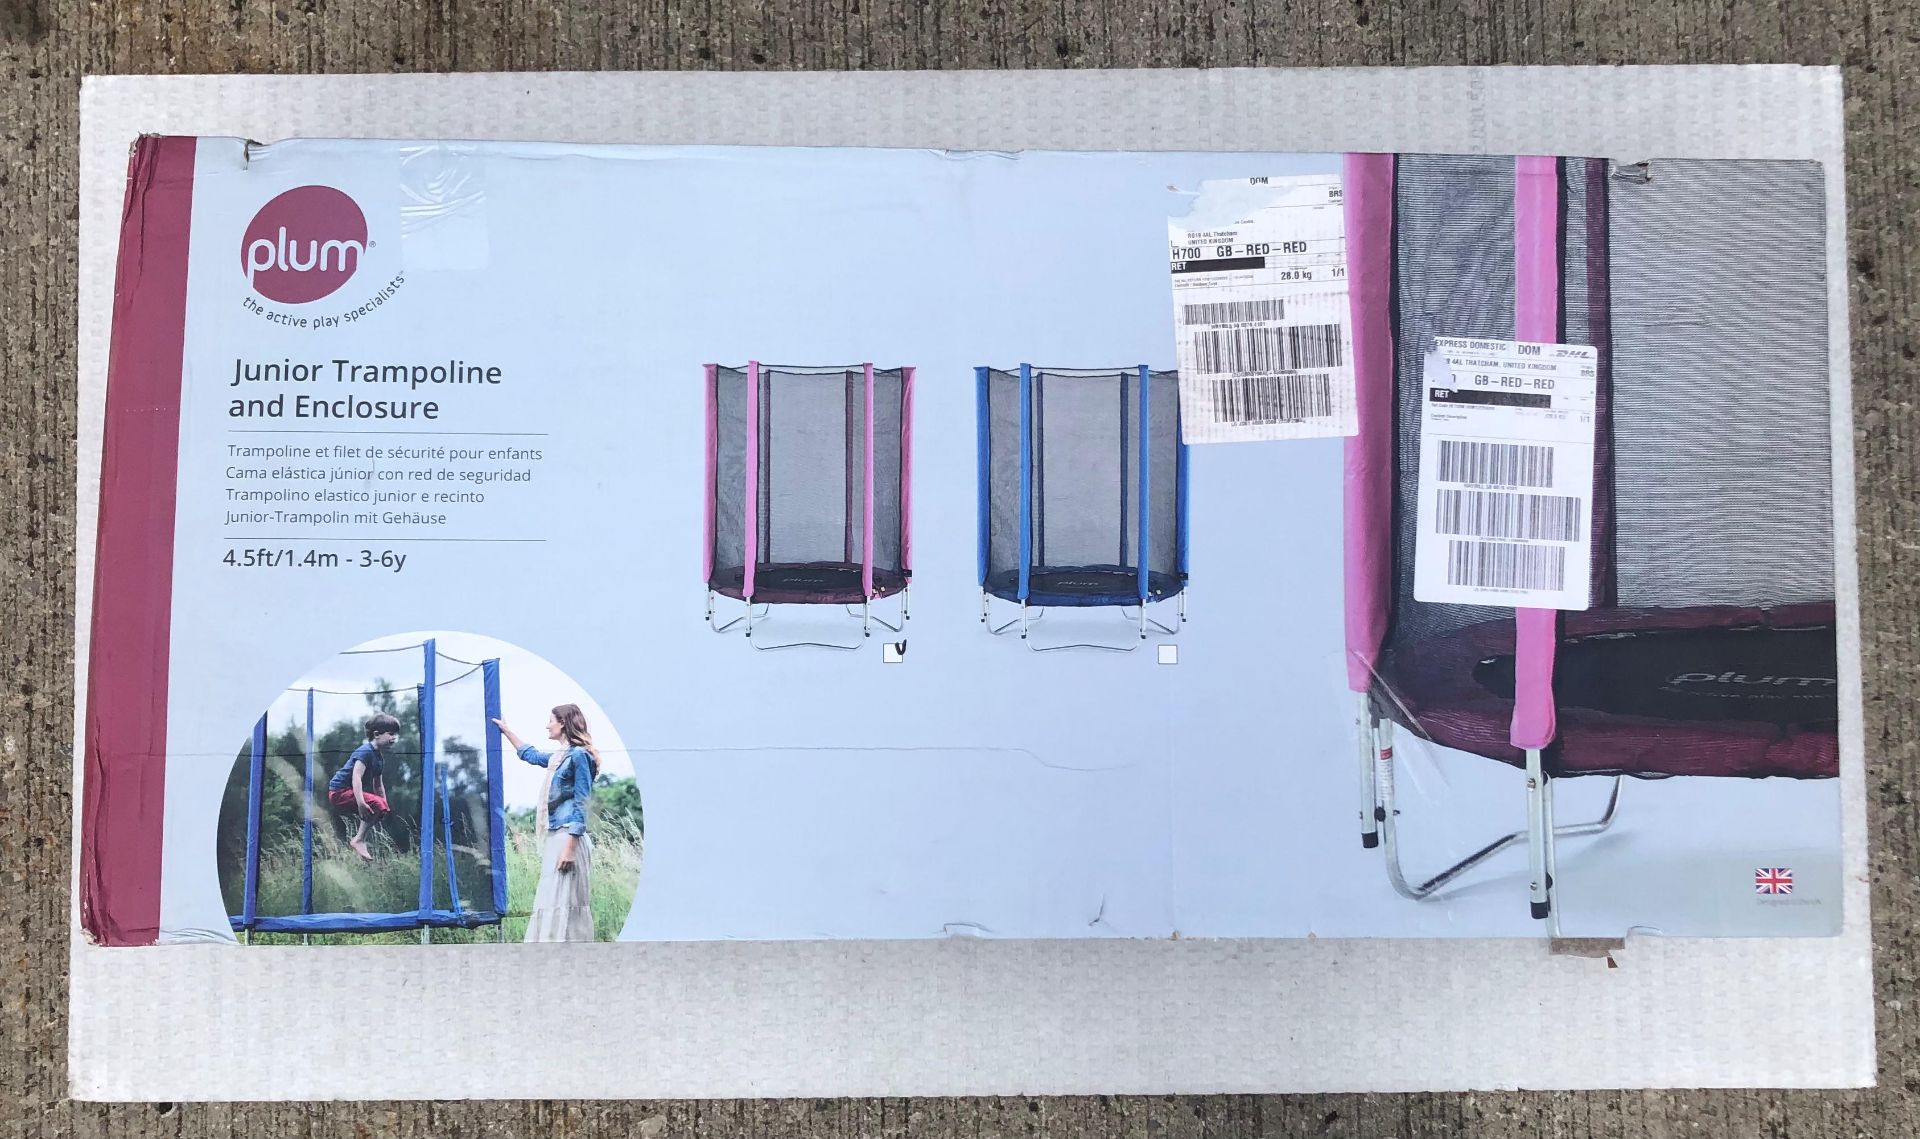 1 x Plum 1.4m/4.5ft Junior Trampoline and Enclosure in Pink - New/Boxed - Image 2 of 5